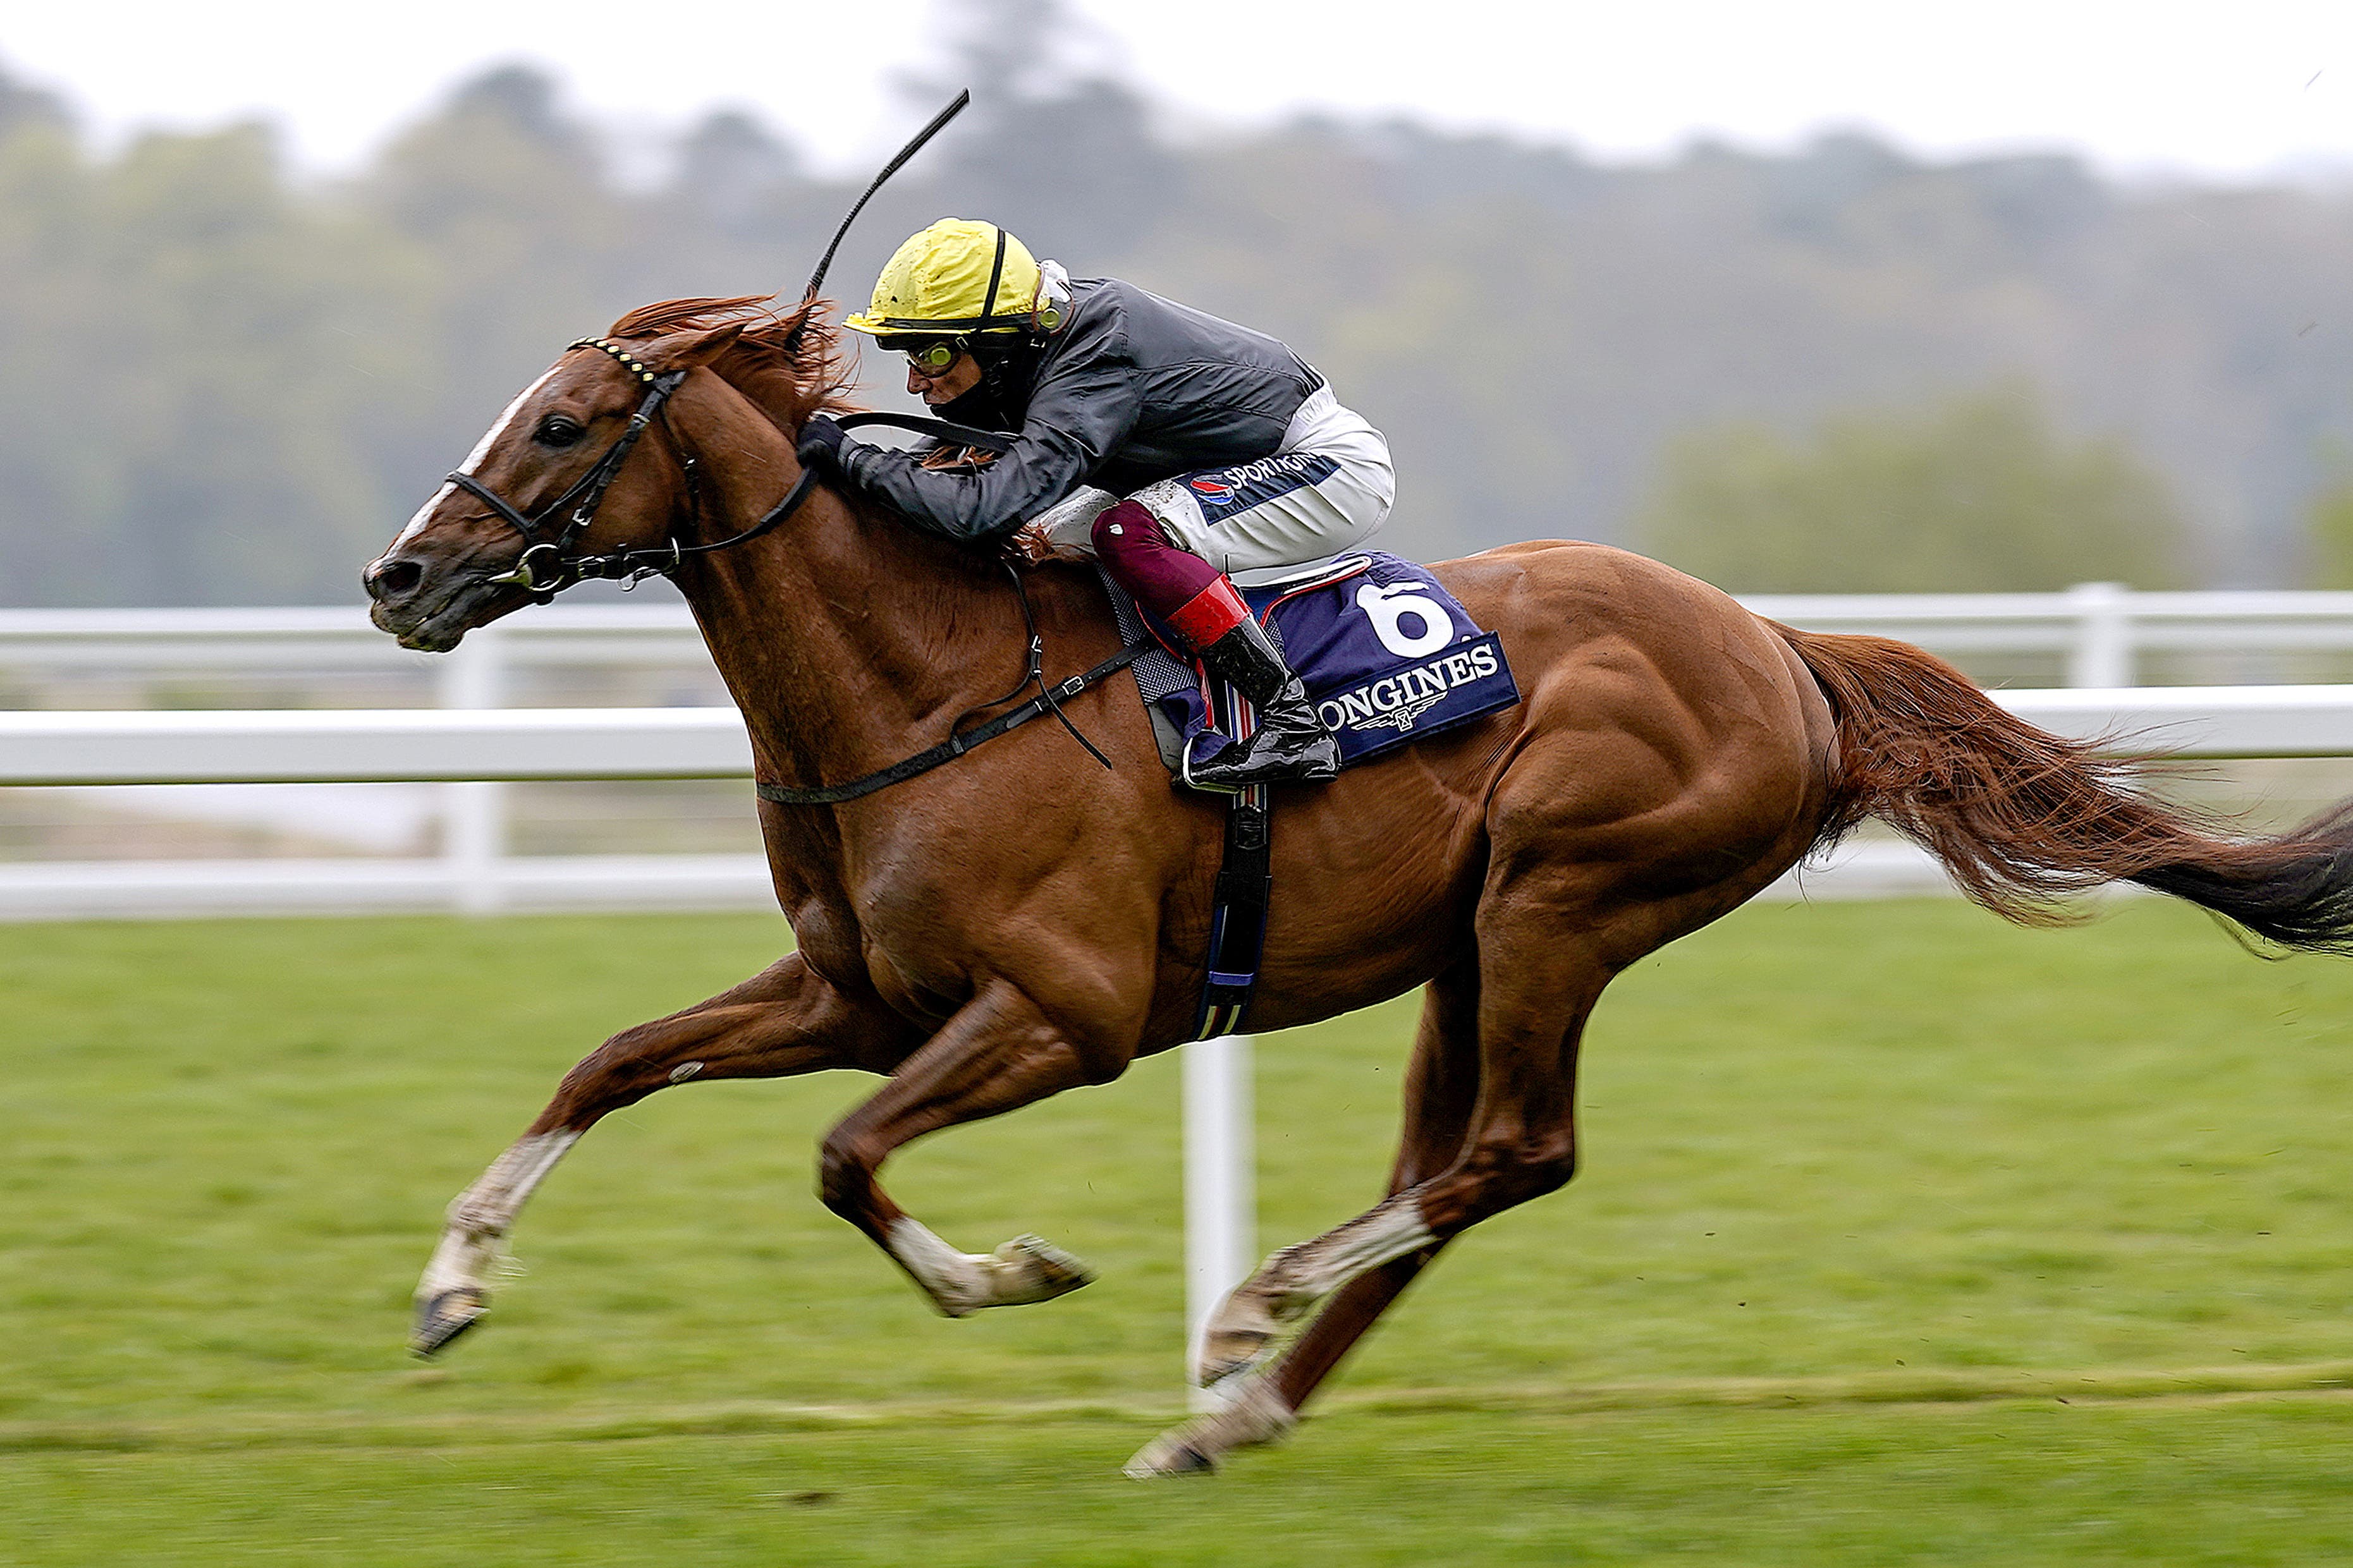 Nielsen feels timing was right as Stradivarius heads to stud